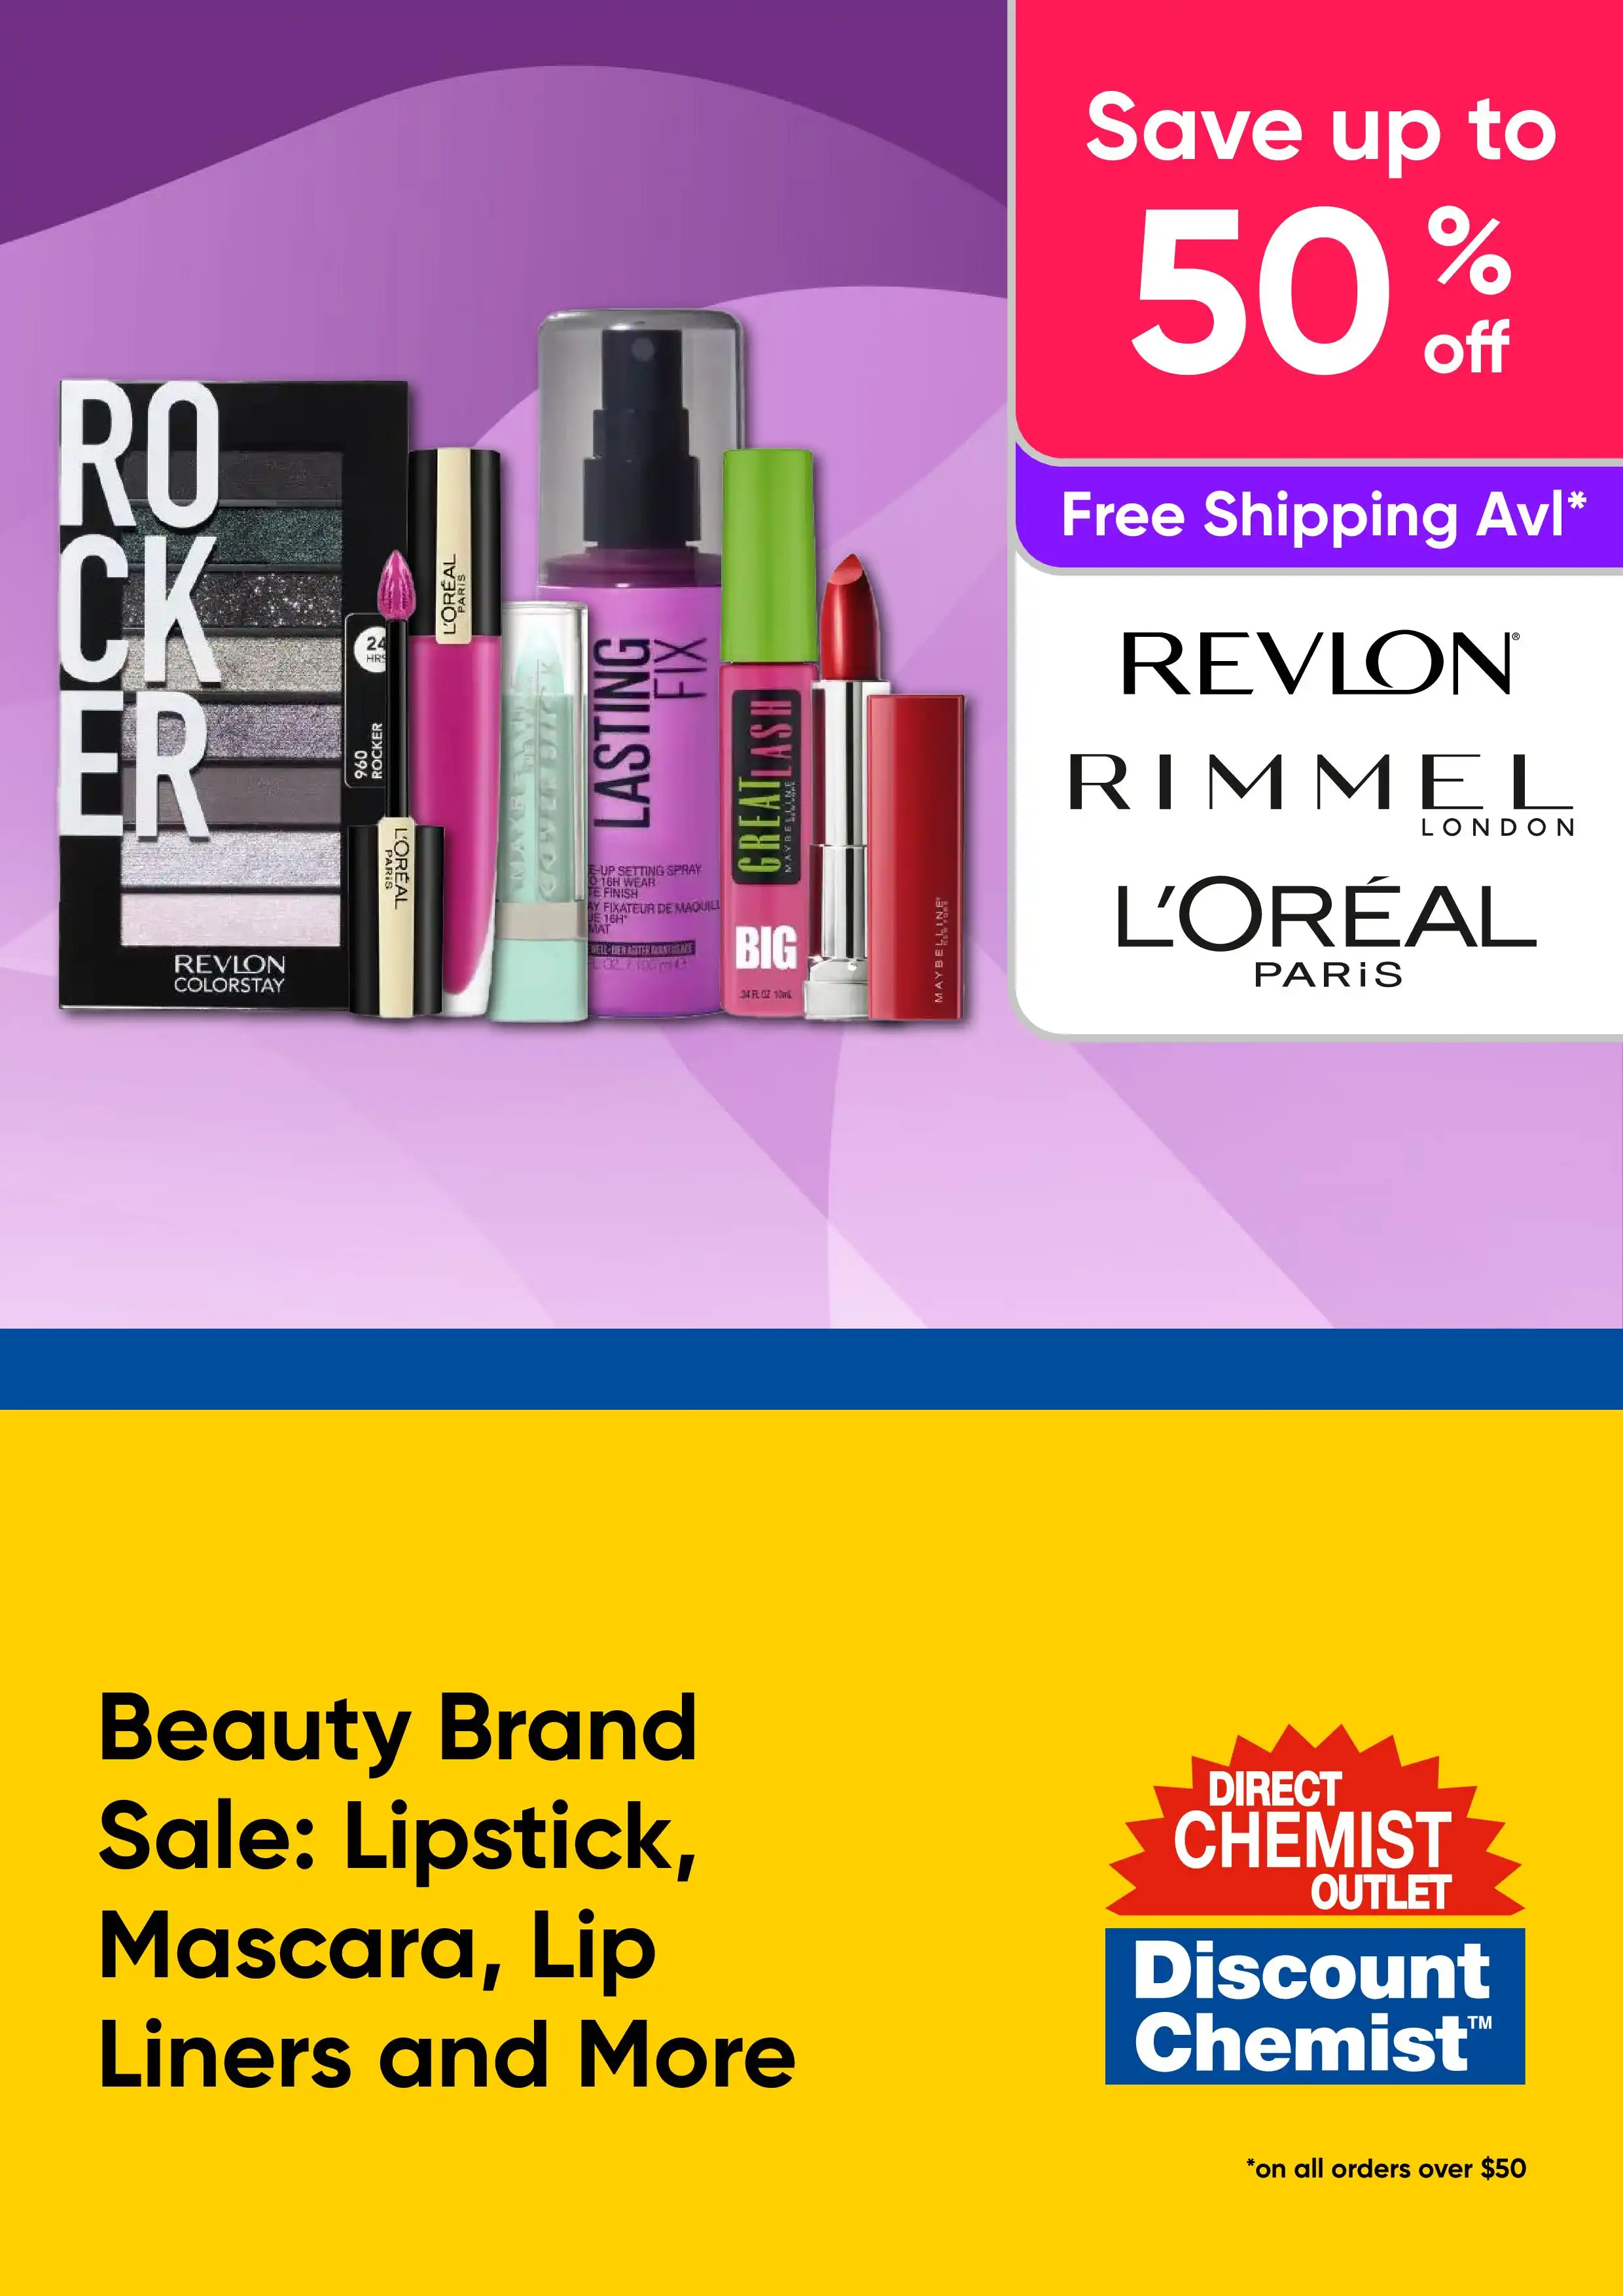 Beauty Brand Sale - Lipstick, Mascara, Lip Liners and More - Revlon, Rimmel, Maybelline - up to 50% off